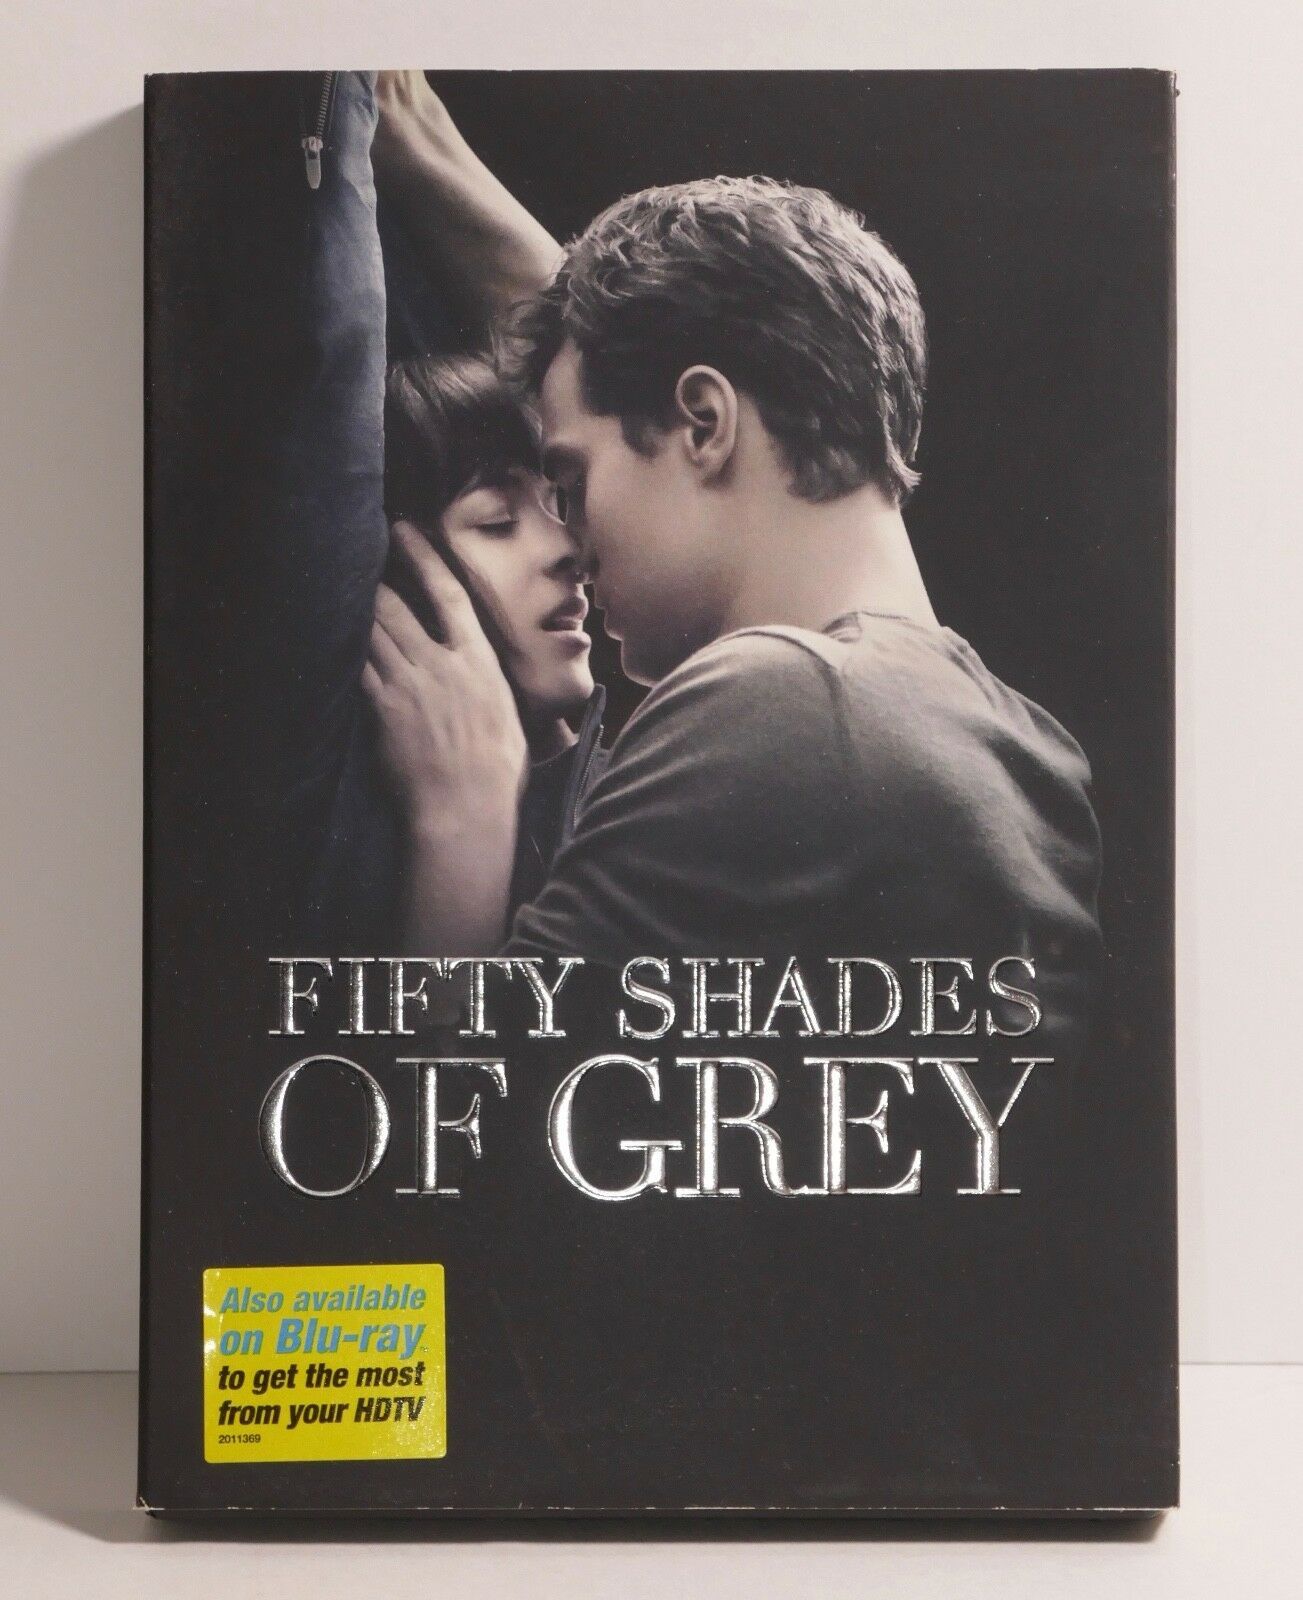 Primary image for Fifty Shades of Grey (DVD, 2015) w/Slipcover